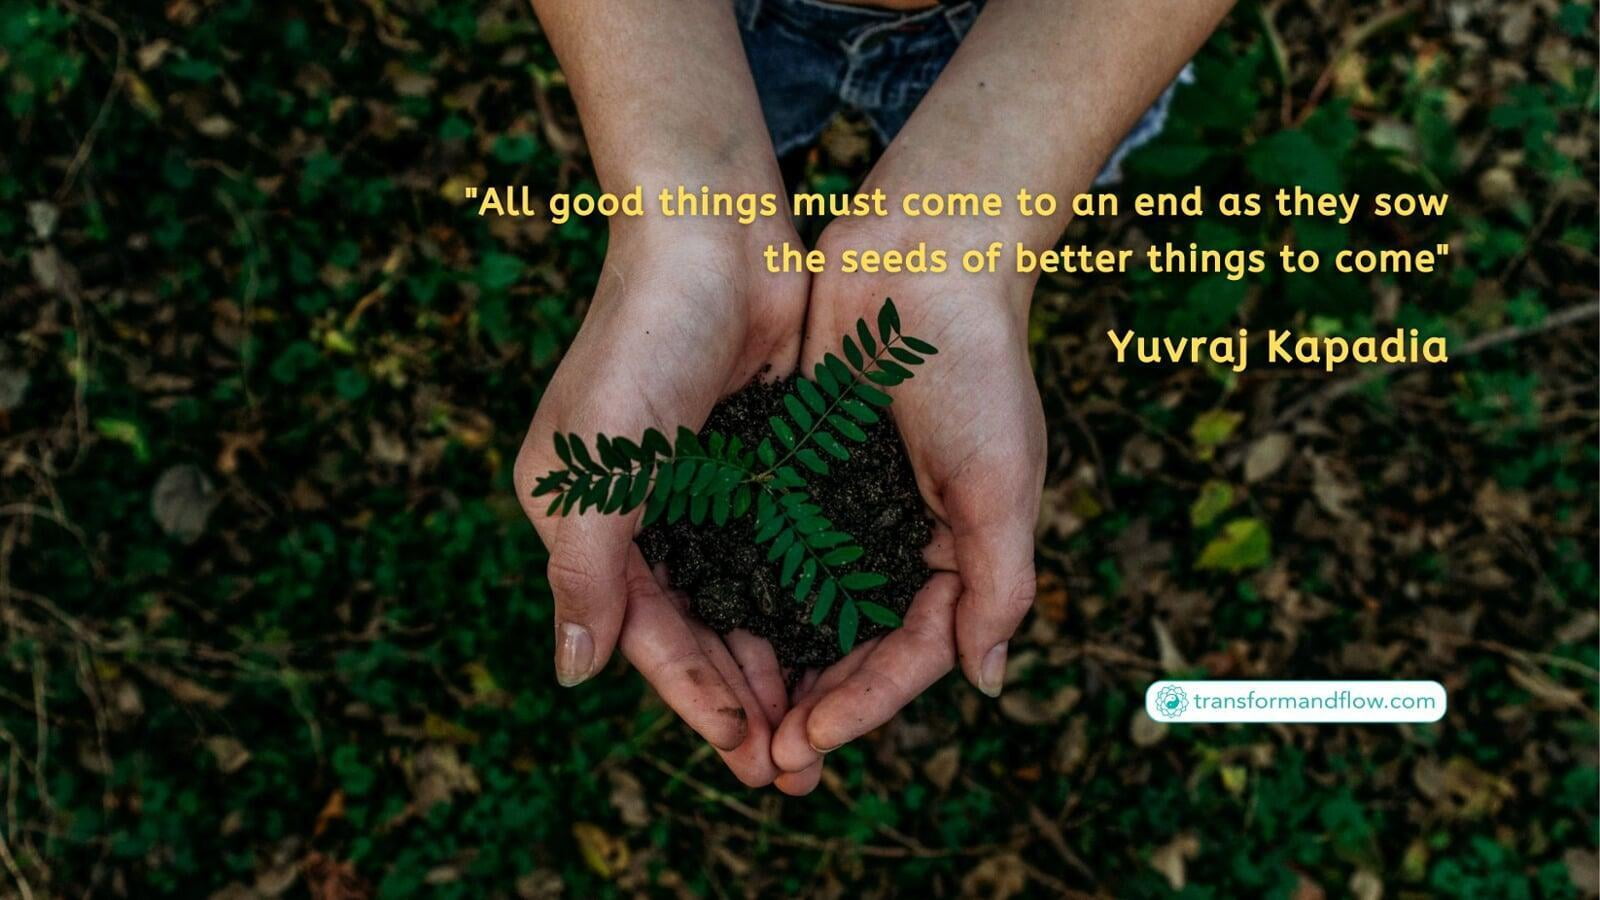 "All good things must come to an end as they sow the seeds of better things to come" Yuvraj Kapadia